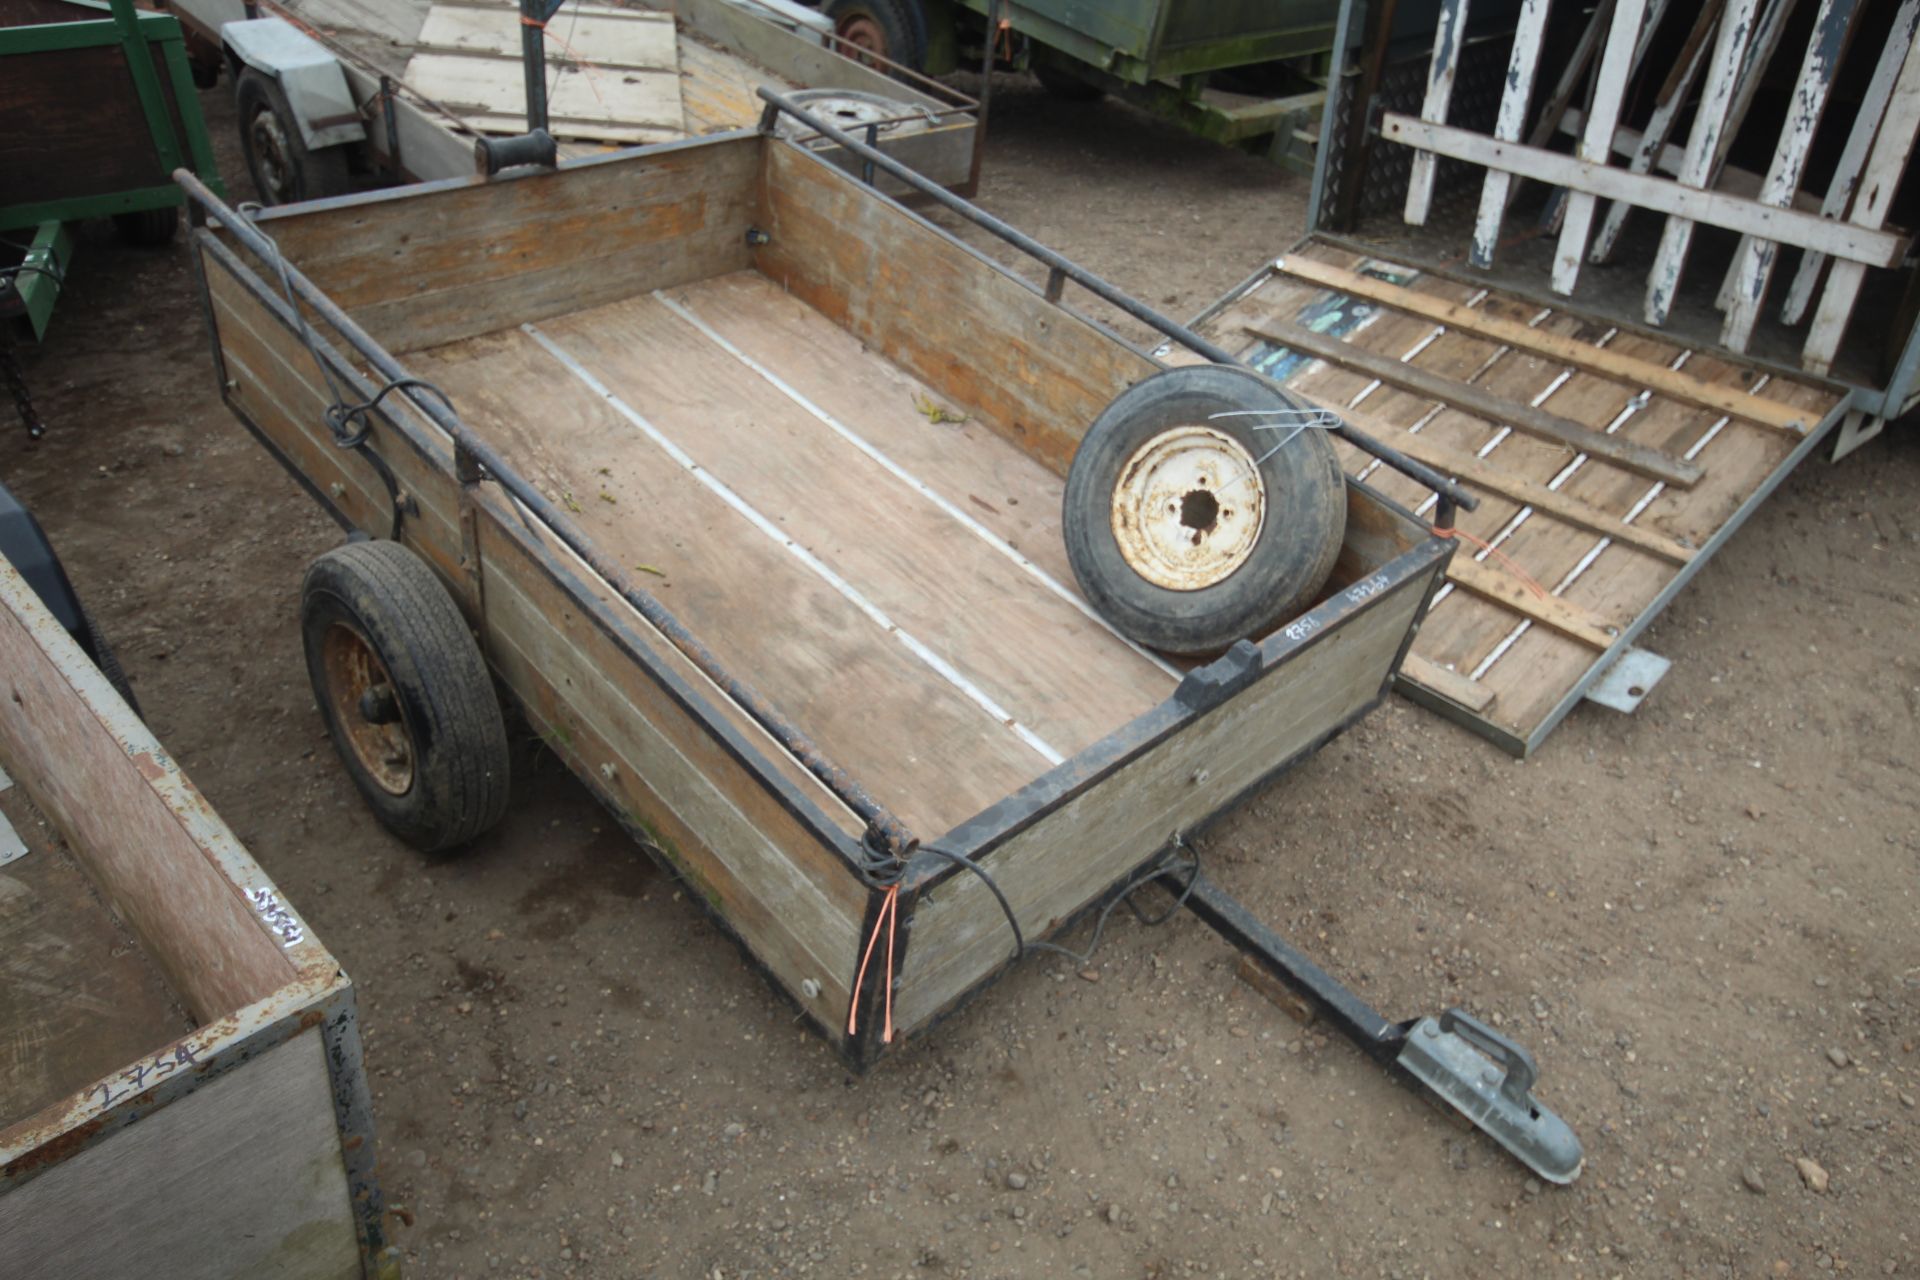 Single axle car trailer.  For sale due to retirement. V